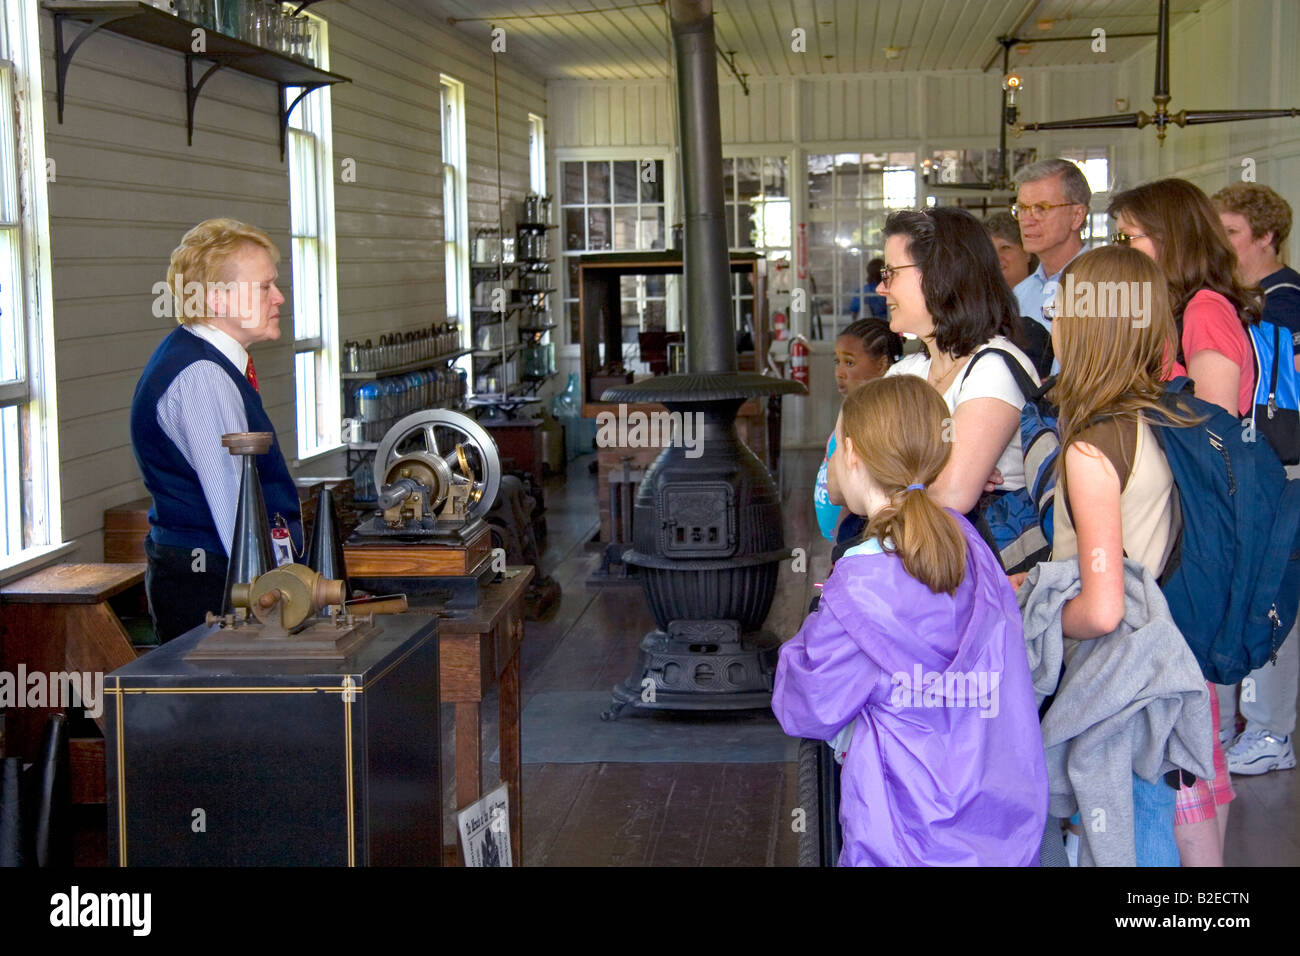 Thomas Edison s Menlo Park laboratory in Greenfield Village at The Henry Ford in Dearborn Michigan Stock Photo